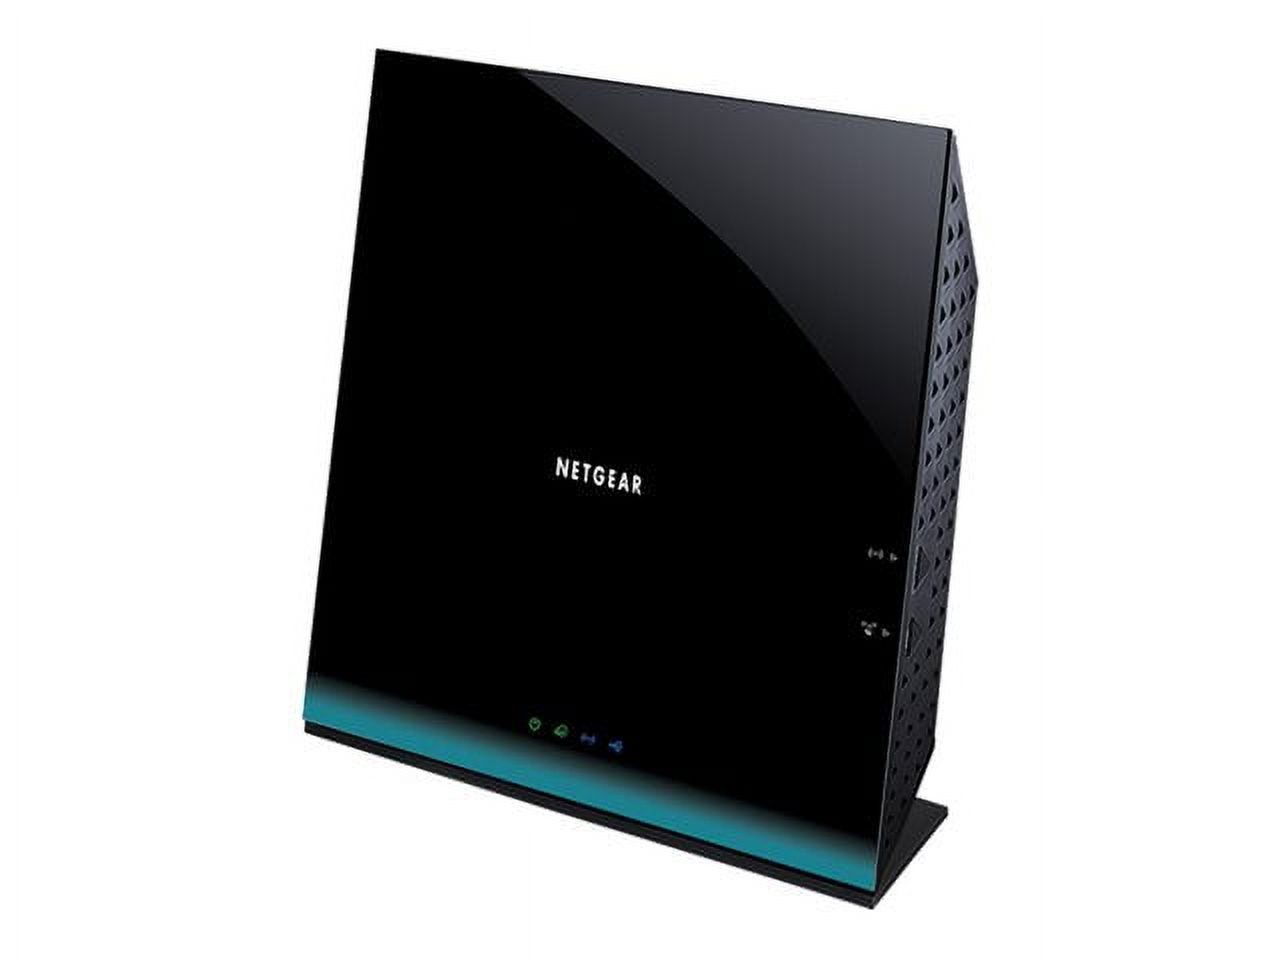 NETGEAR R6100 - Wireless router - 4-port switch - 802.11a/b/g/n/ac - Dual Band - image 5 of 6